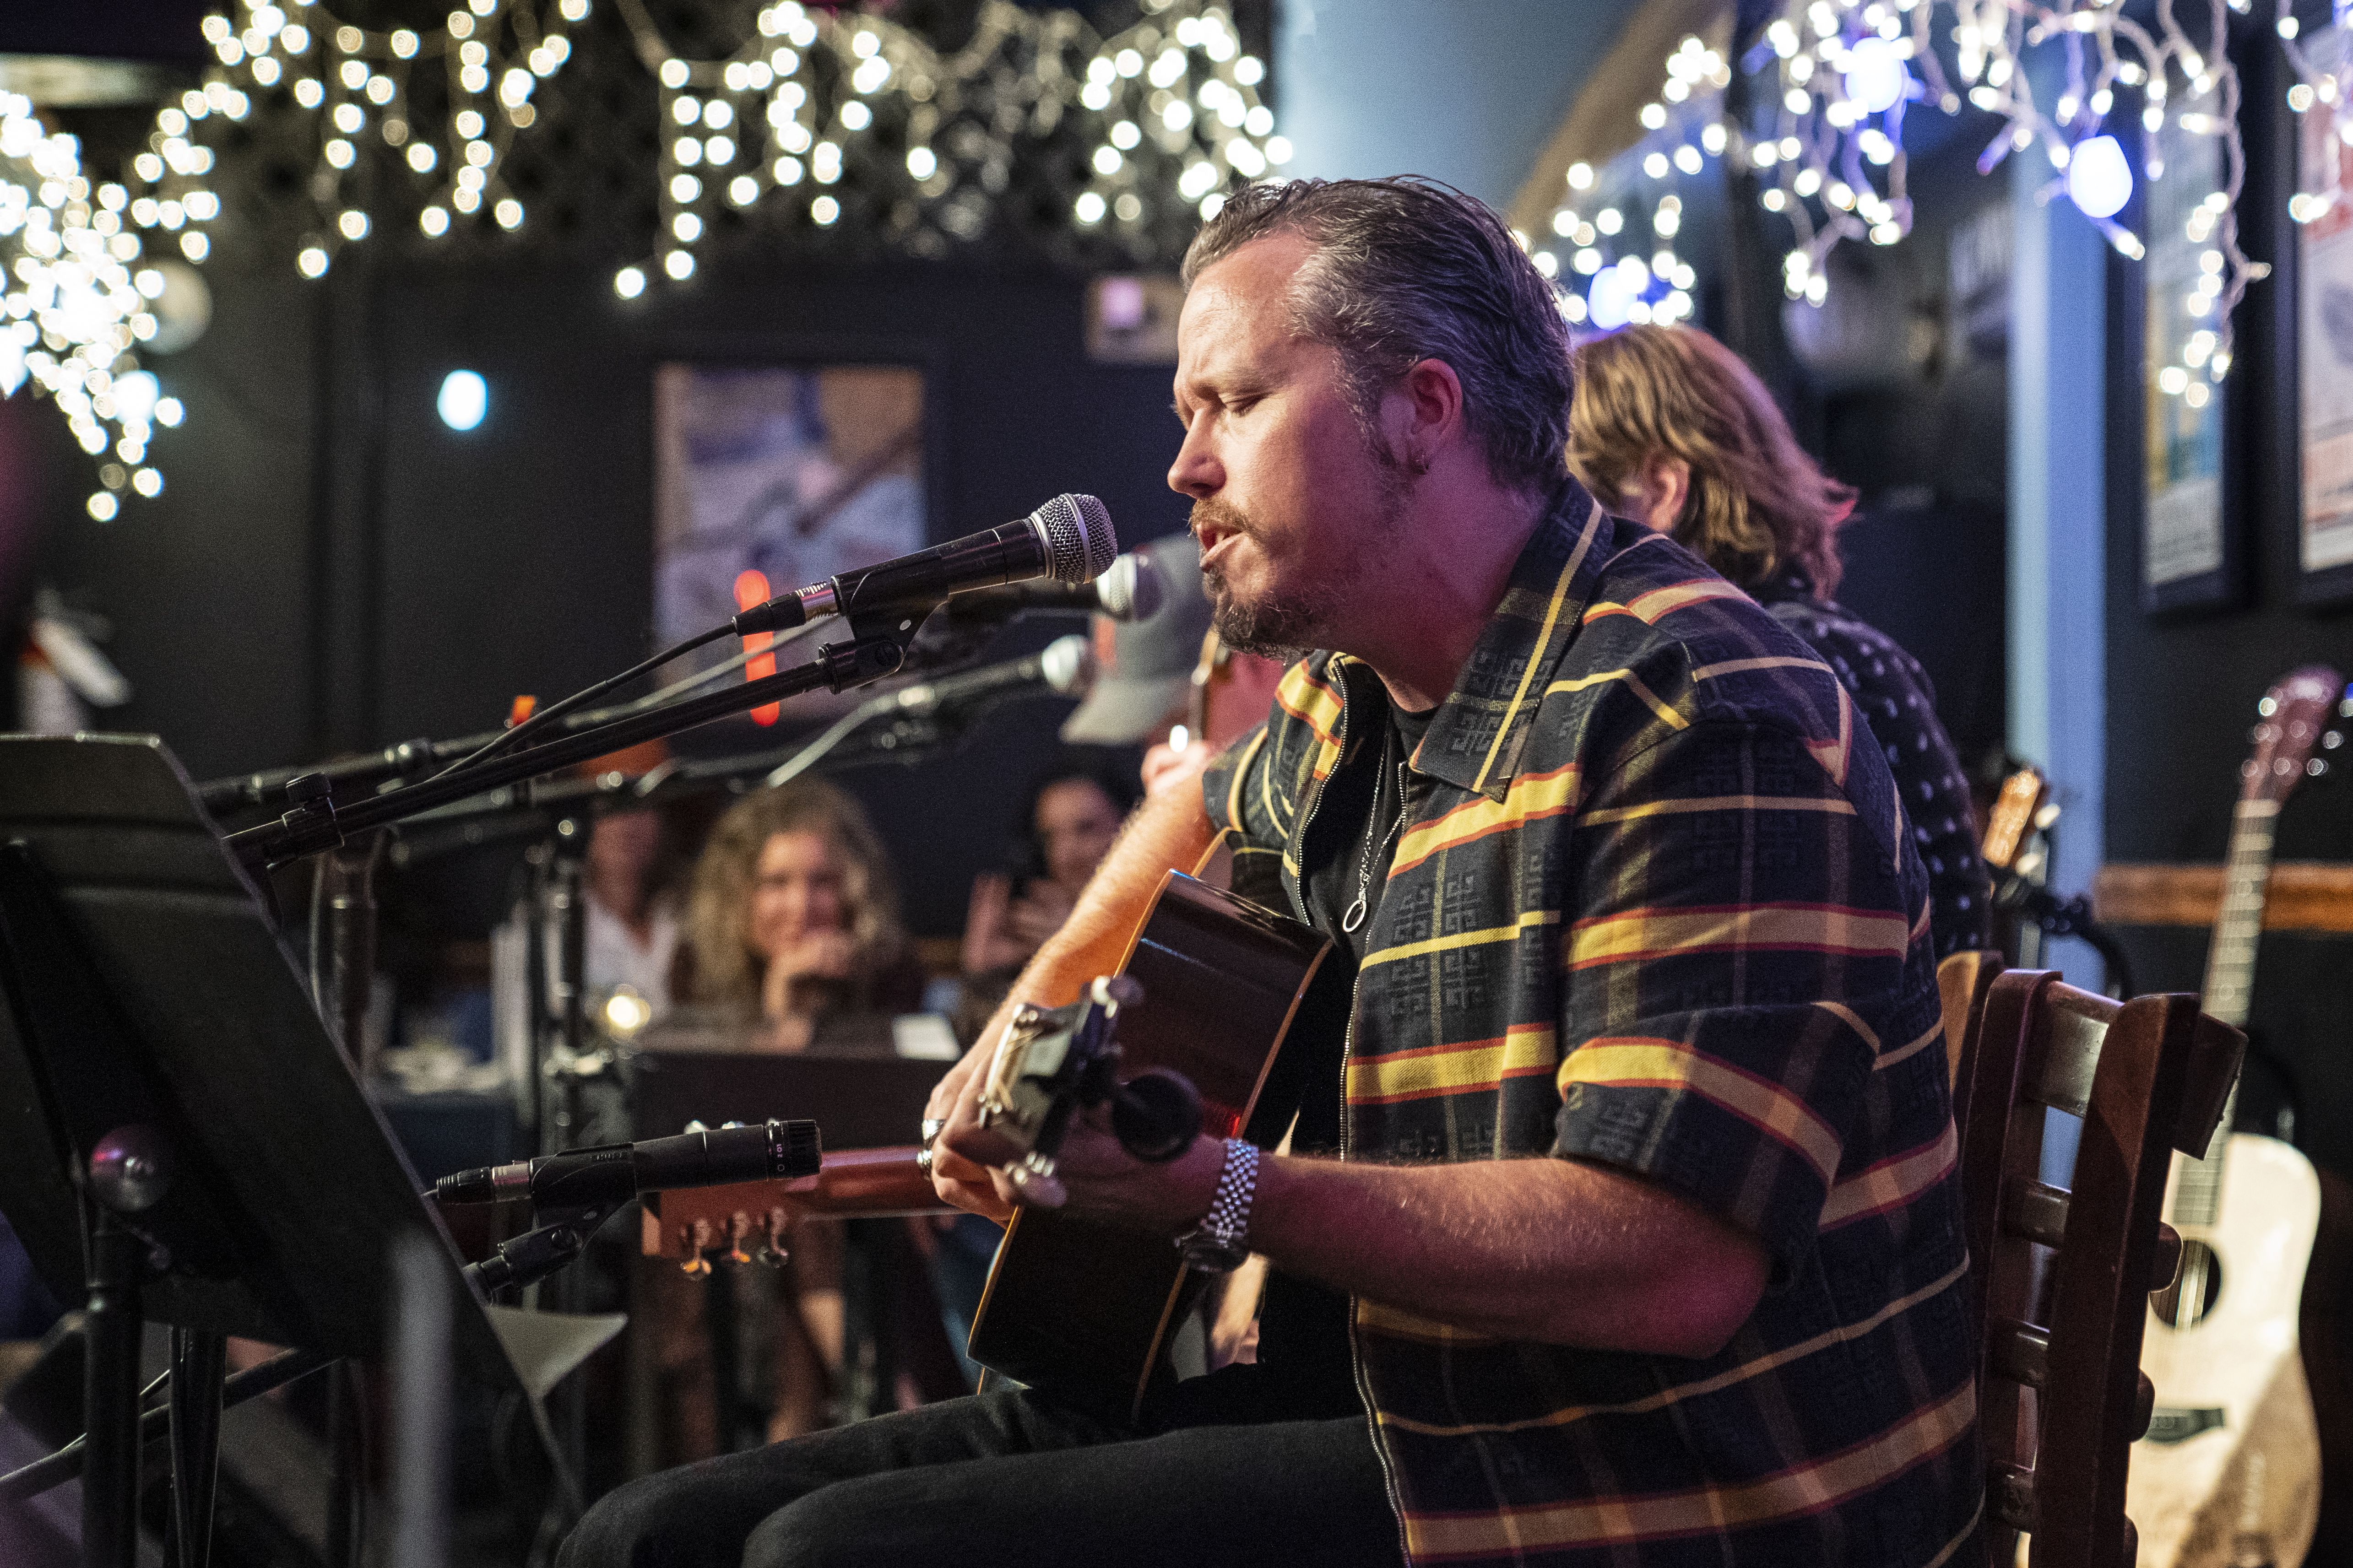 Jason isbell in a yellow striped shirt at the Bluebird Cafe